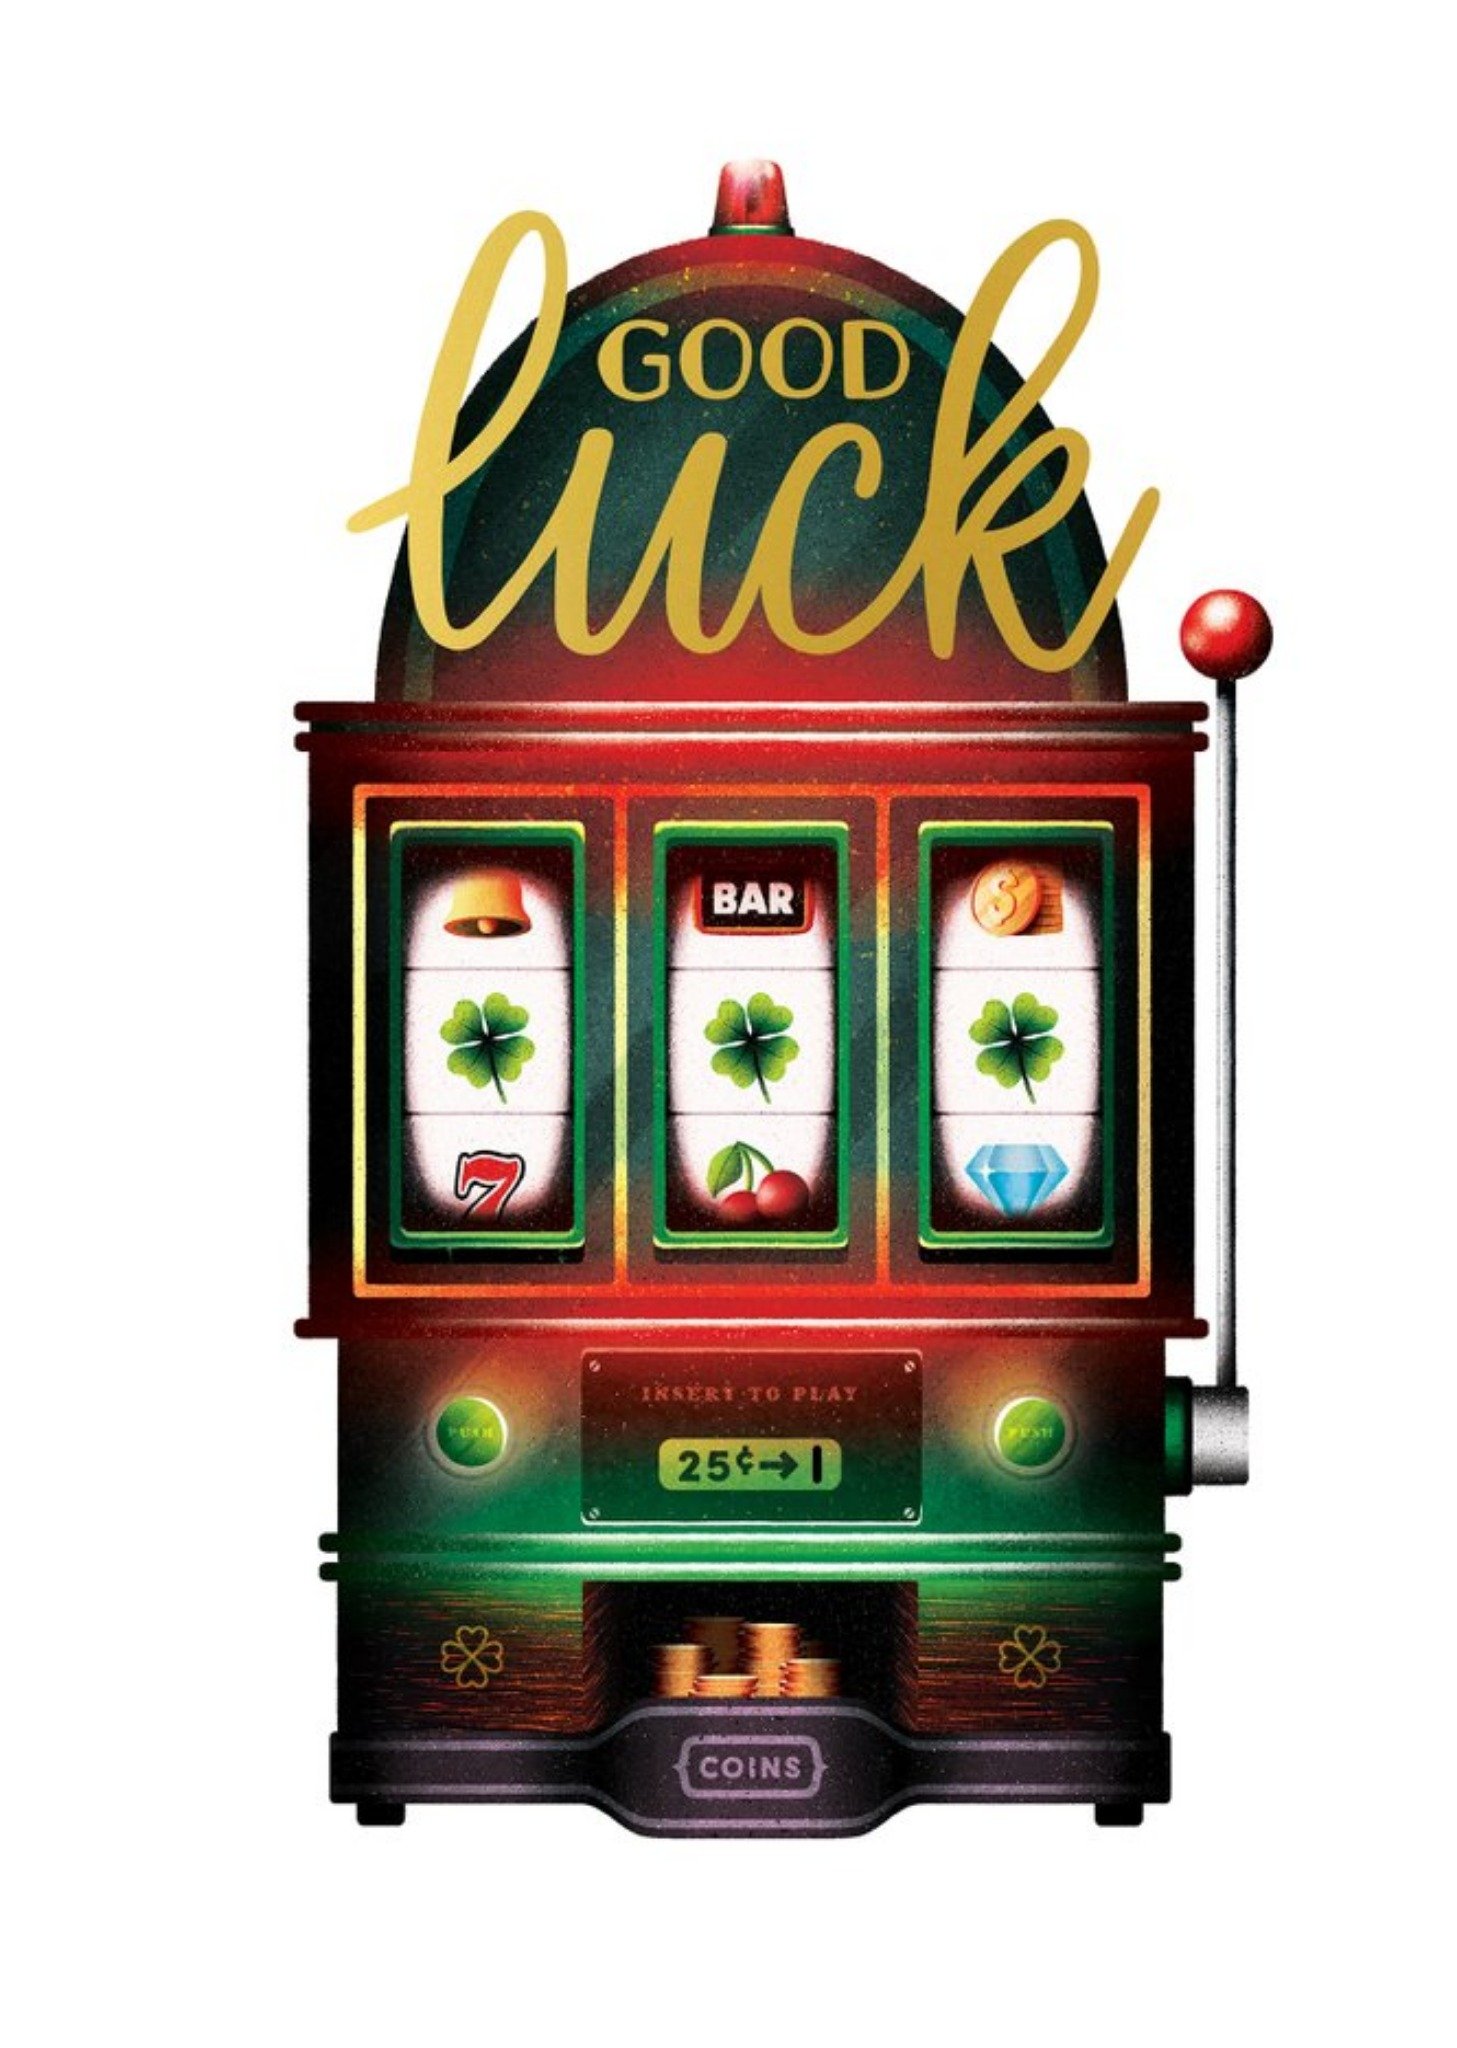 Moonpig Folio Illustrated Slot Machine With Three Four Leaf Clovers Good Luck, Large Card